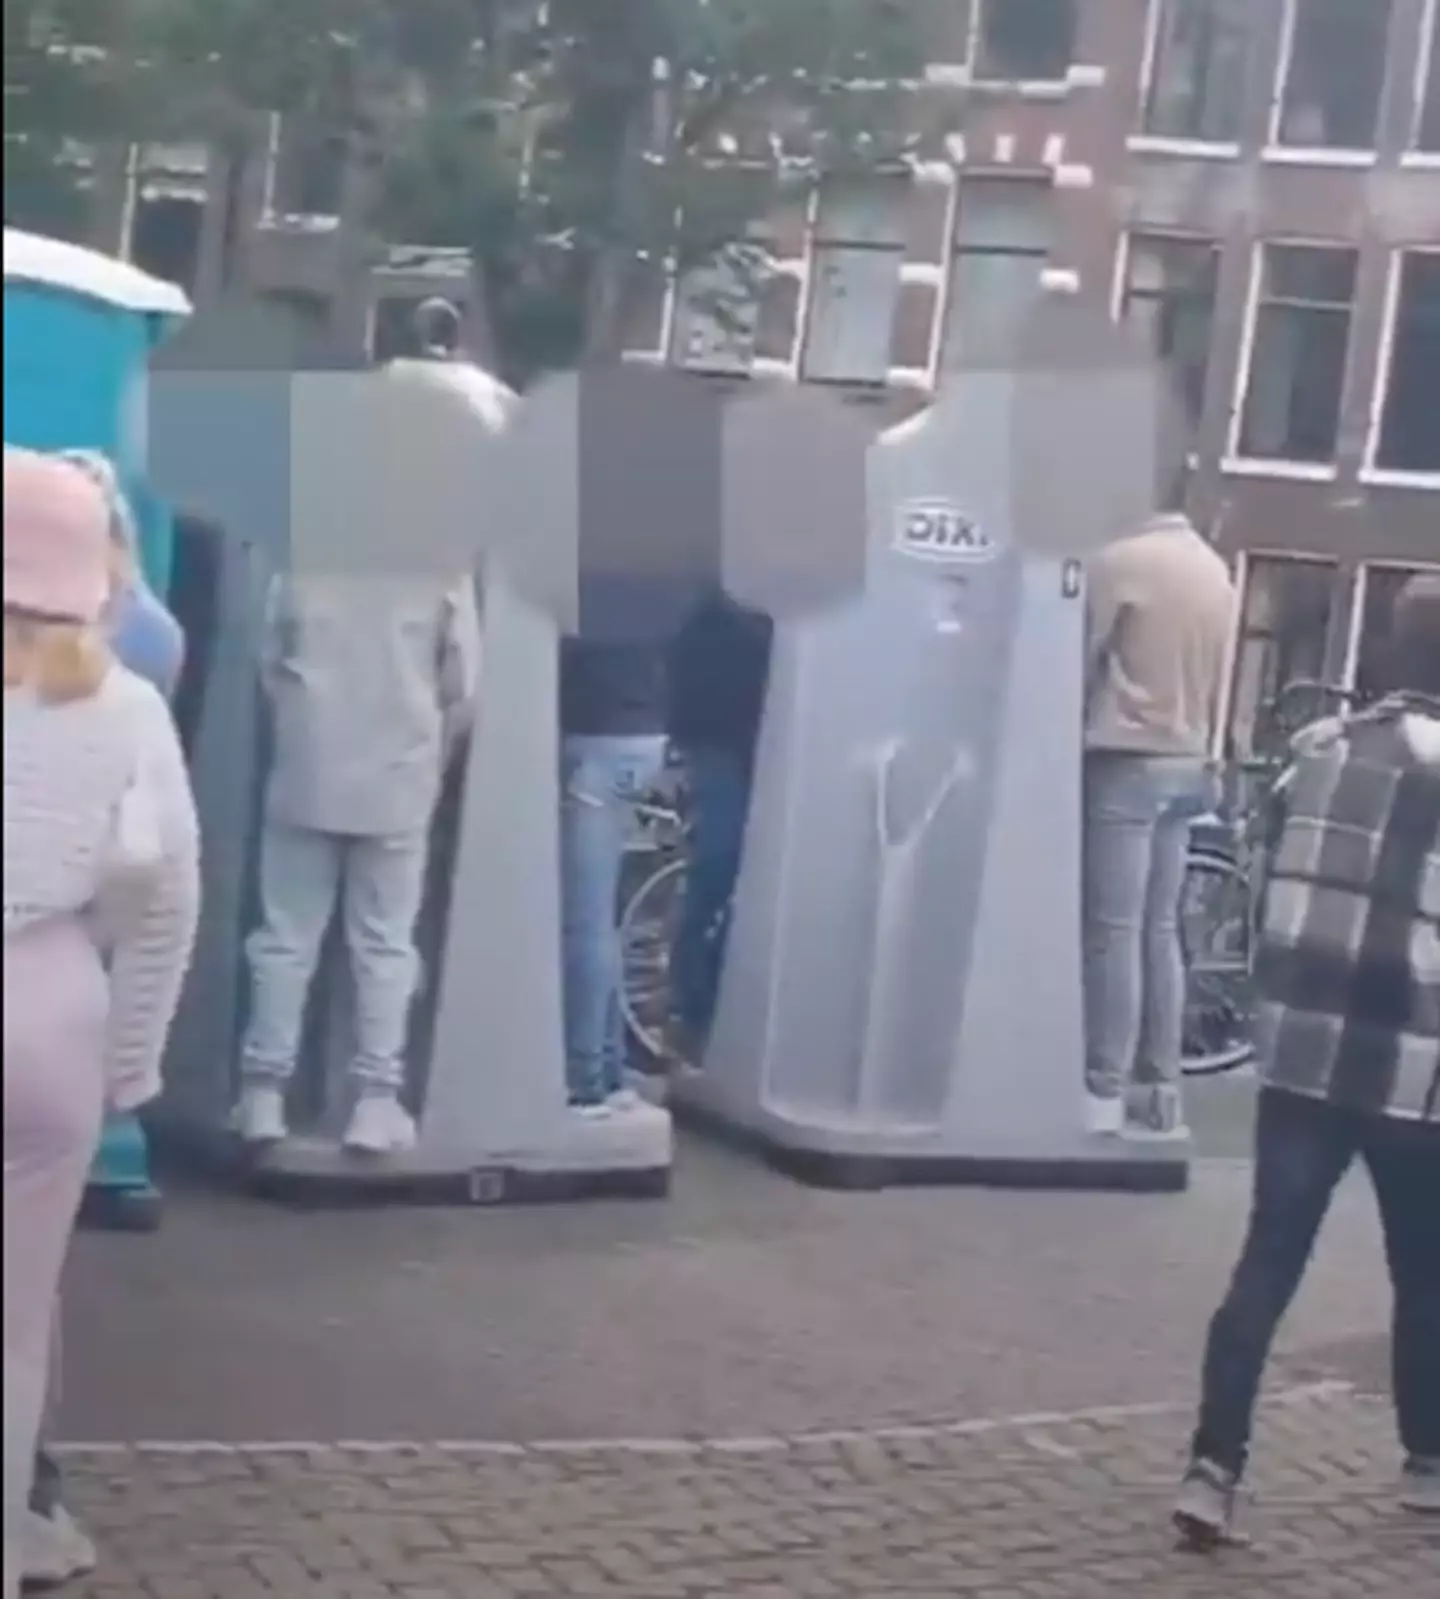 A short video showcasing men in Amsterdam, Netherlands, using a public urinal has left many on Reddit stunned.